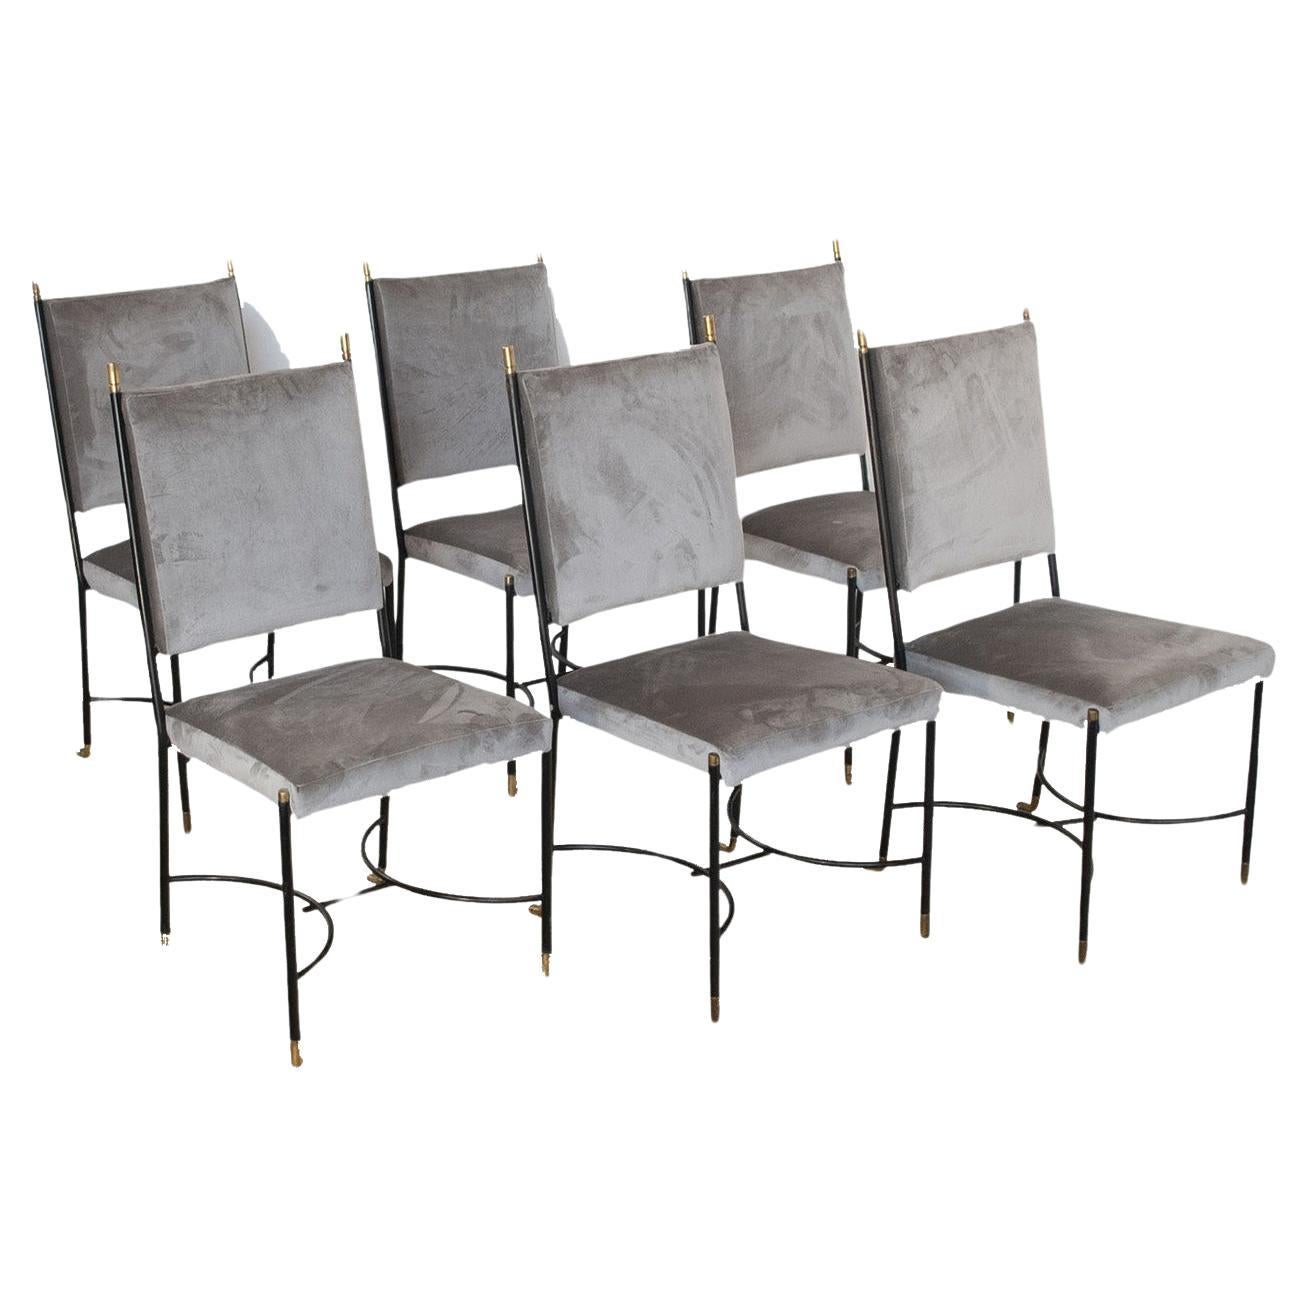  Luigi Caccia Dominioni set of the chairs from the sixties For Sale